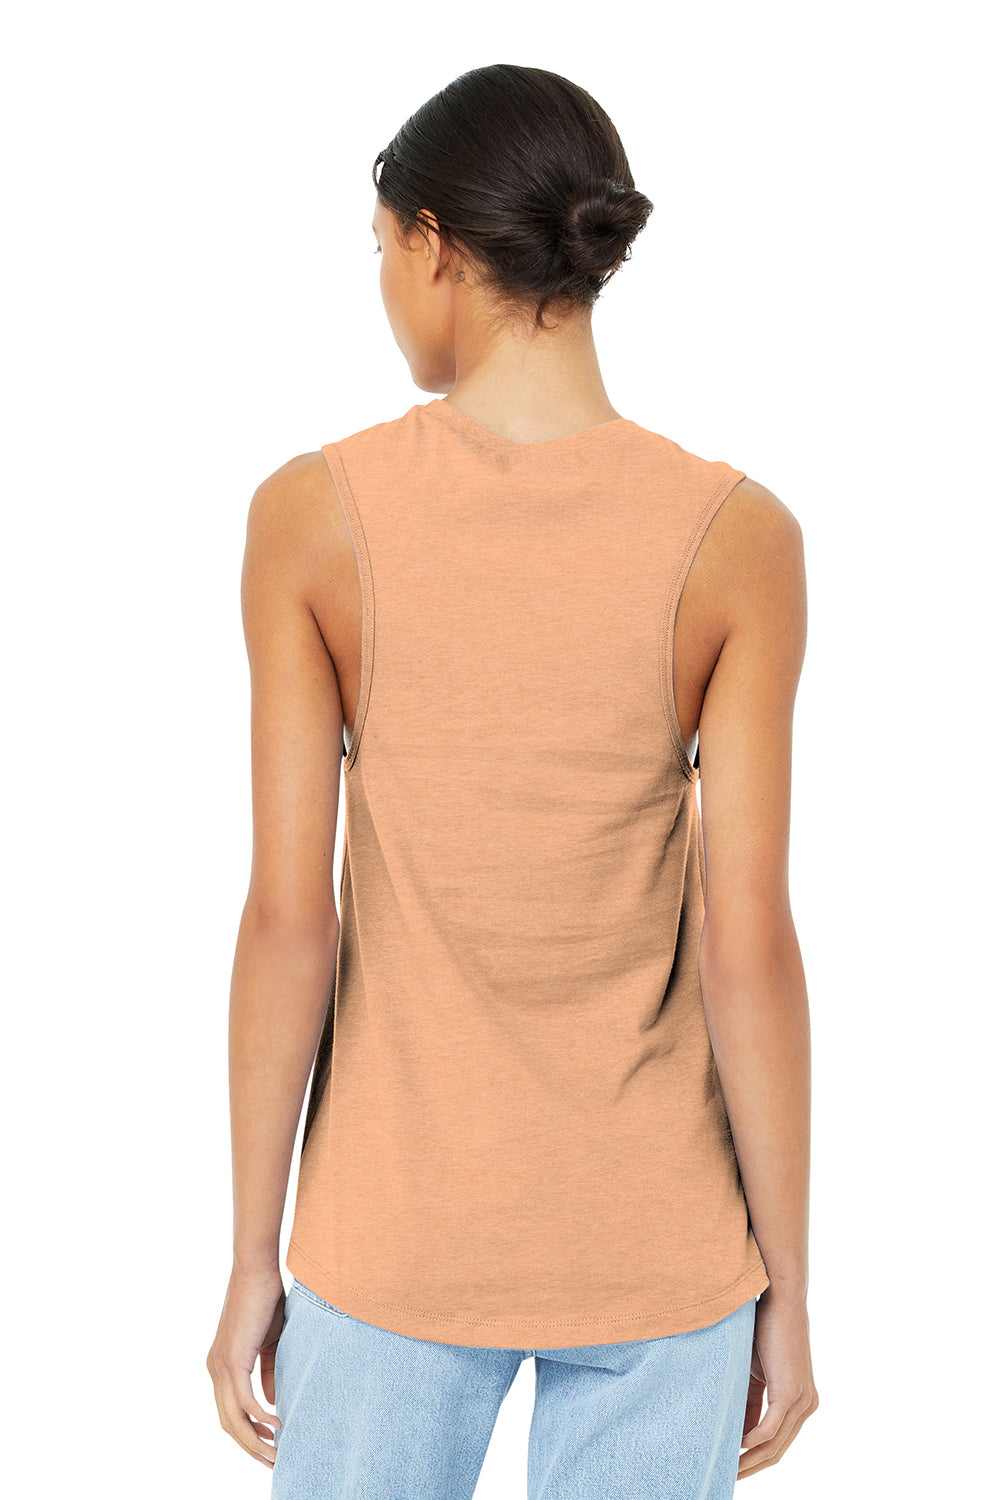 Bella + Canvas BC6003/B6003/6003 Womens Jersey Muscle Tank Top Heather Peach Model Back